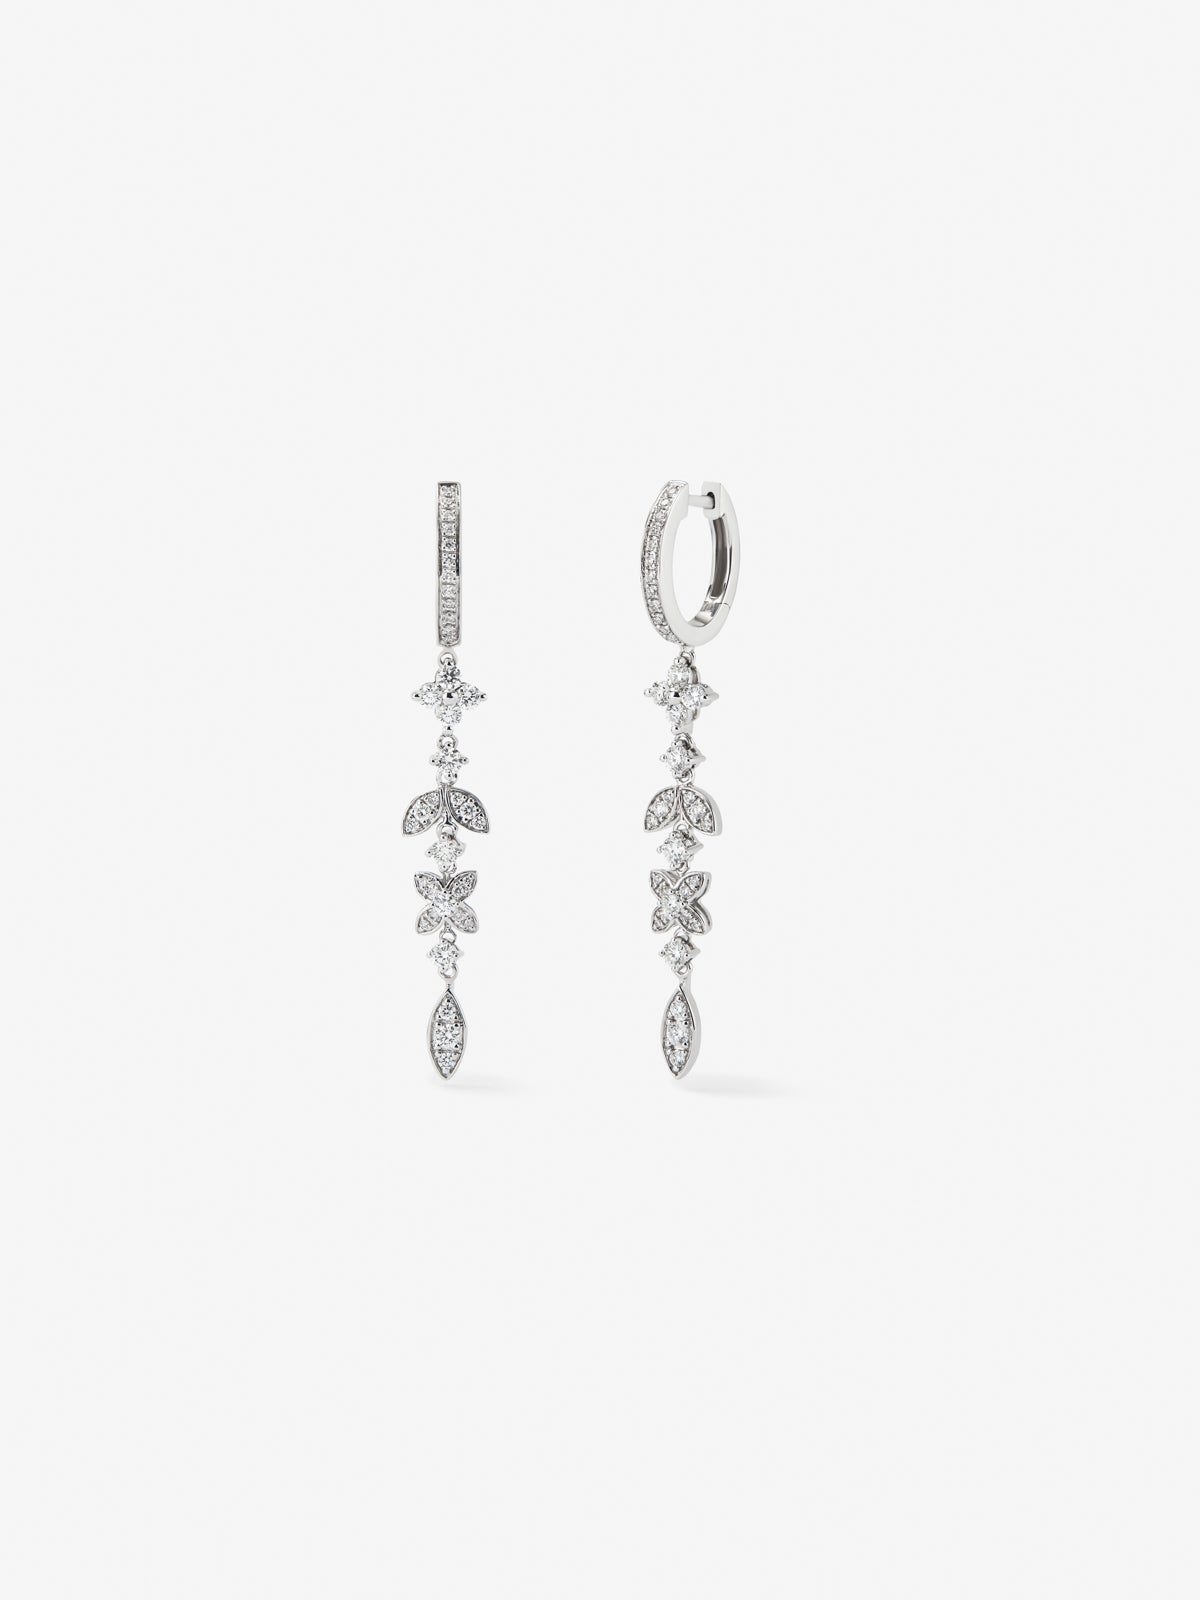 18K white gold earrings with 70 brilliant-cut diamonds with a total of 0.75 cts